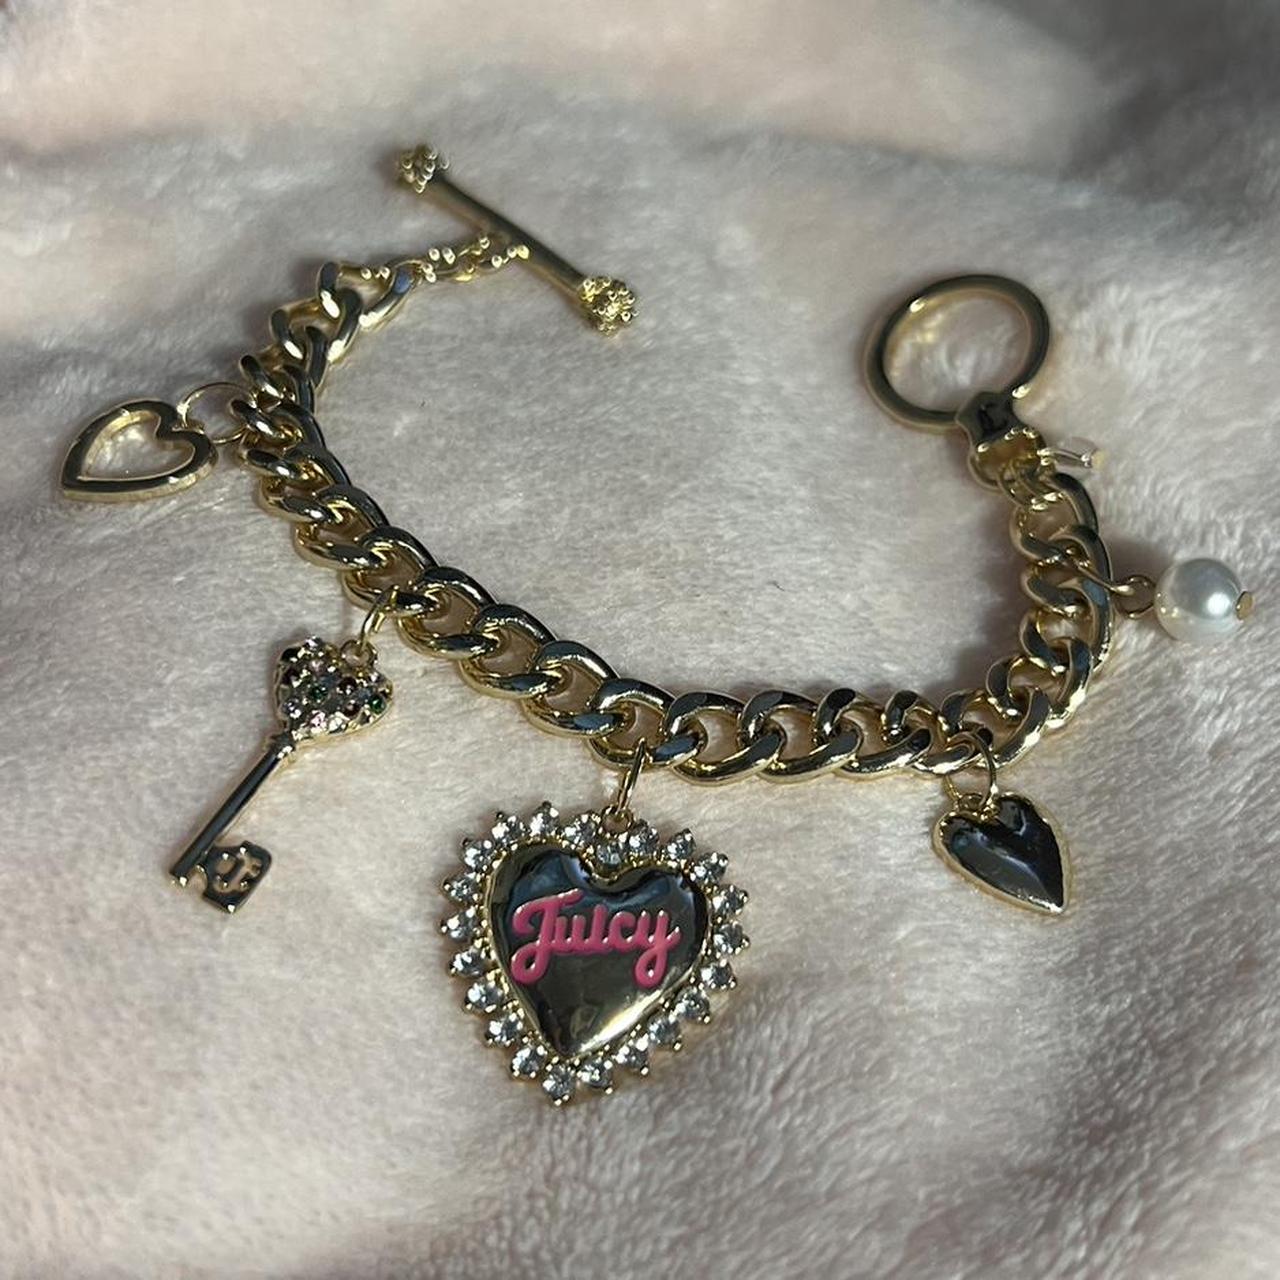 Juicy Couture, Jewelry, Juicy Couture Silver Tone Charm Bracelet